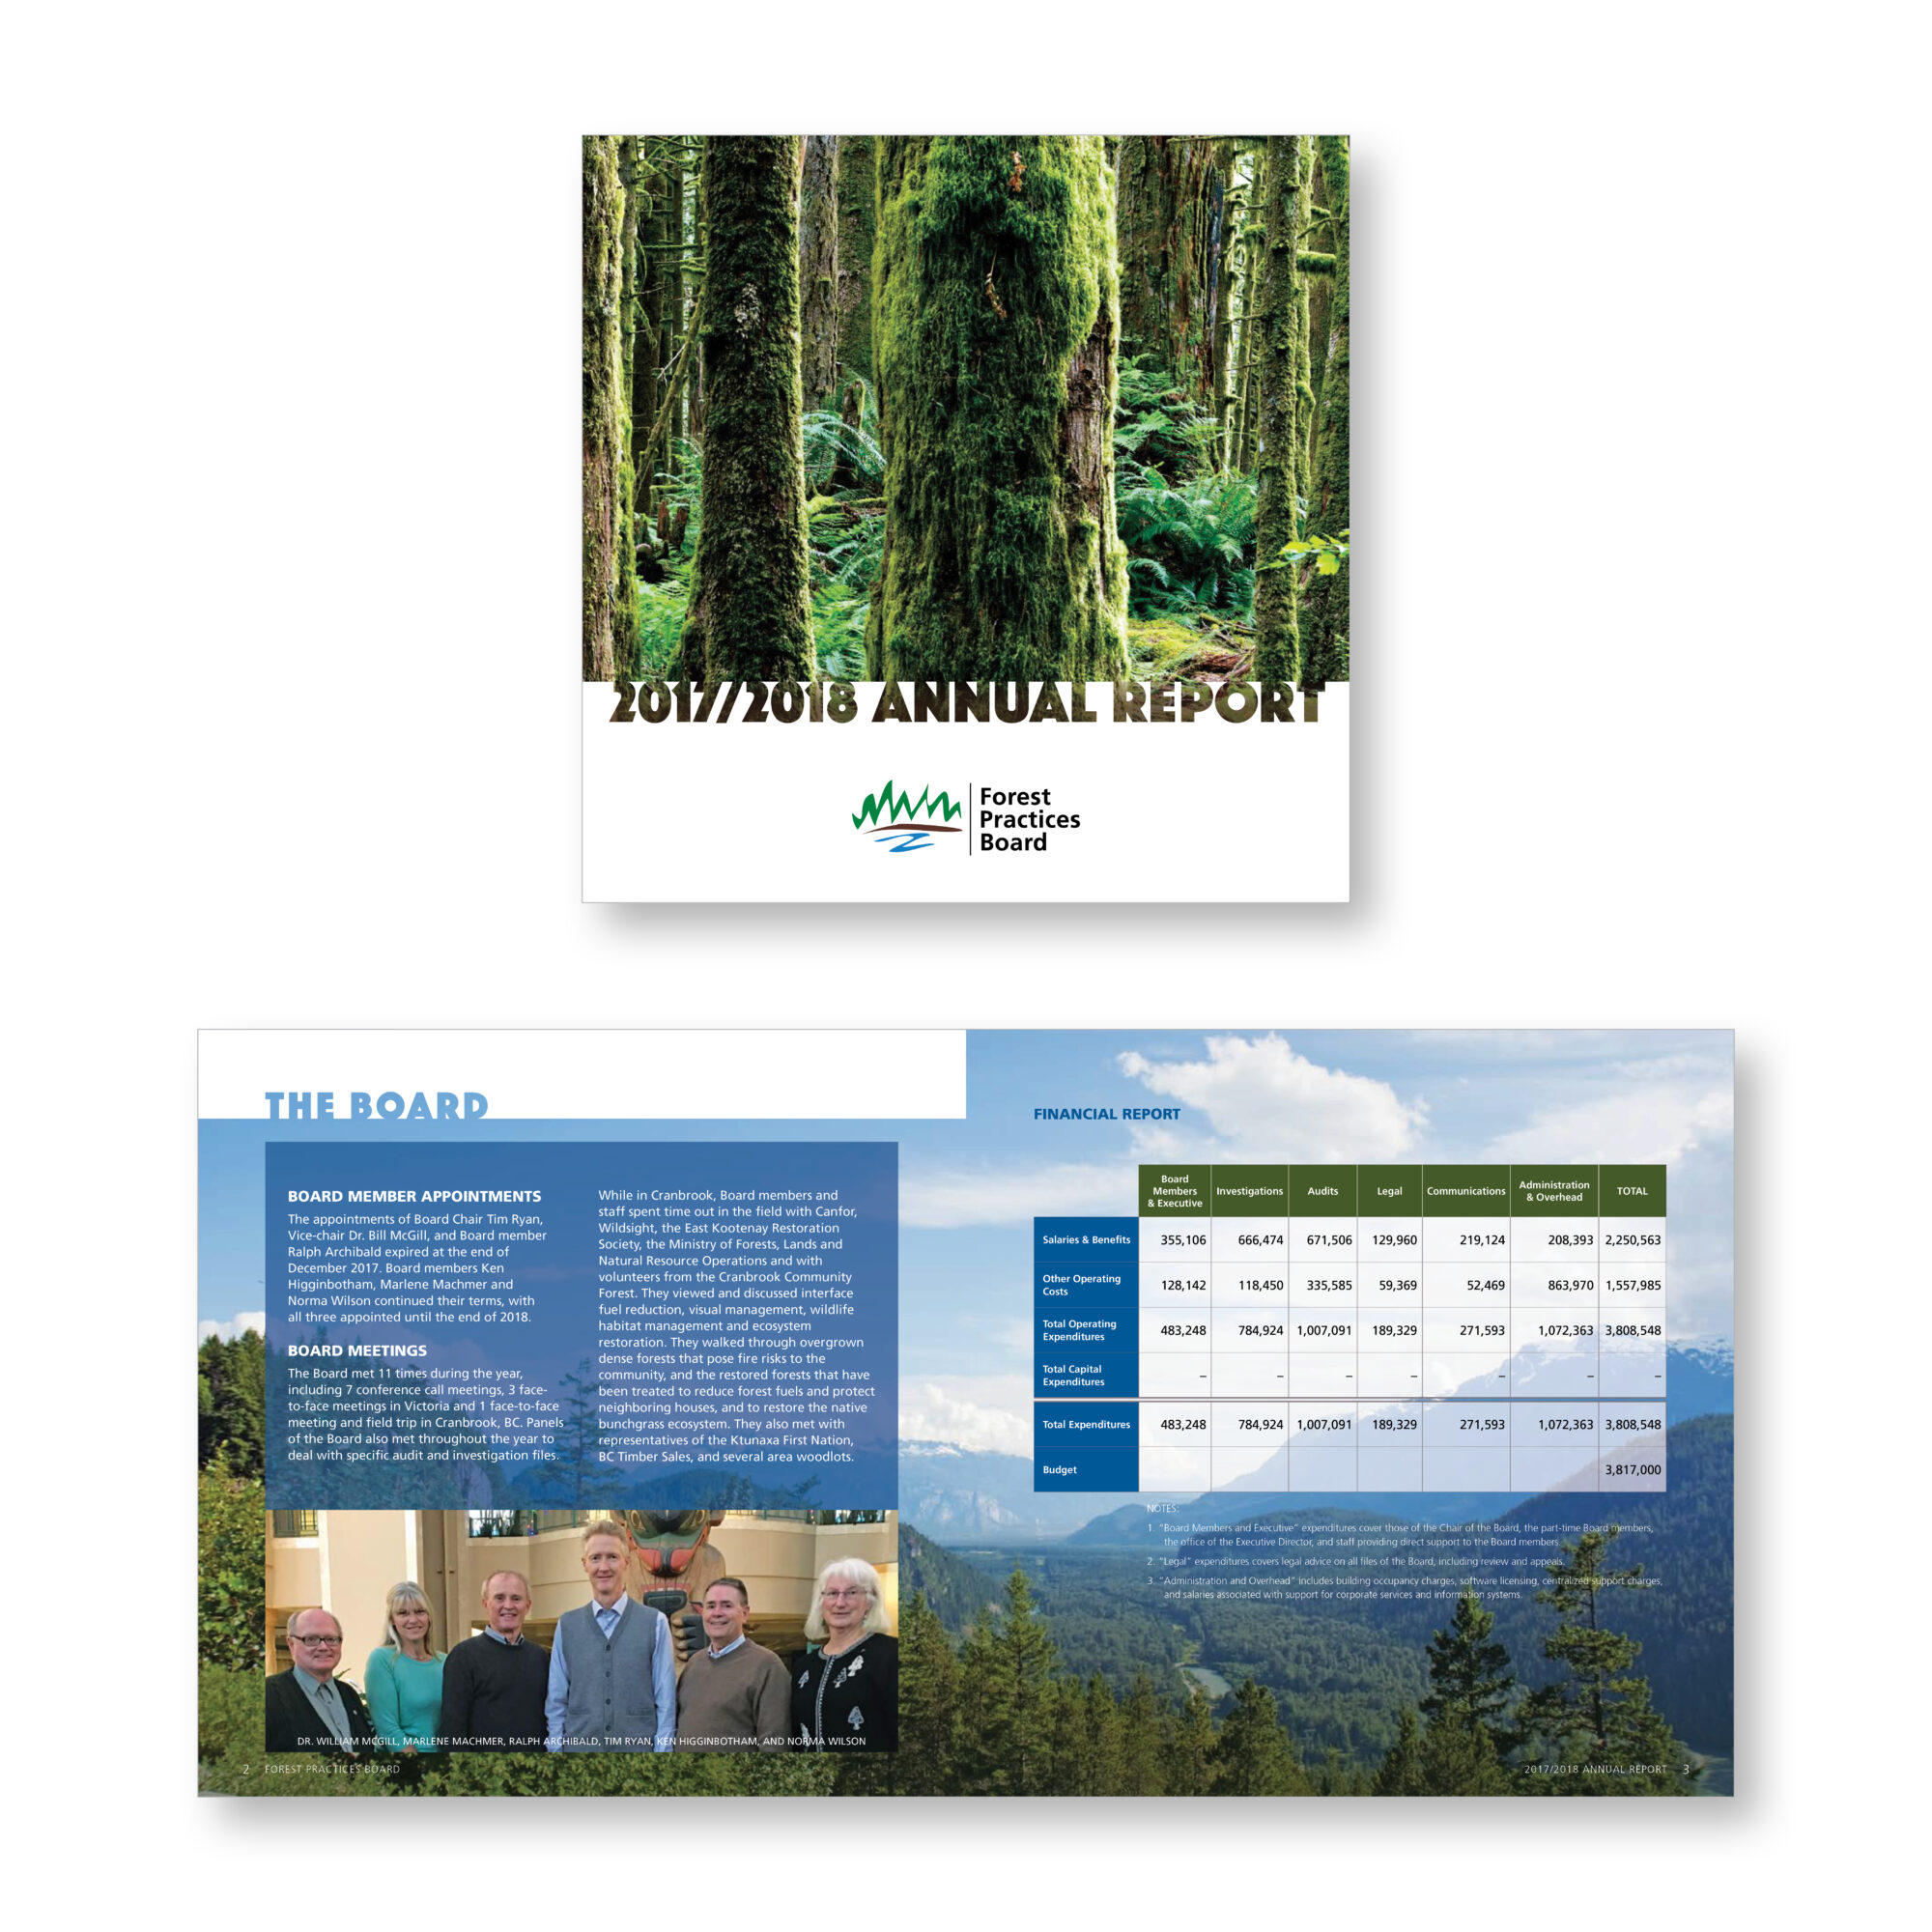 Forest Practices Board - 2017/18 Annual Report